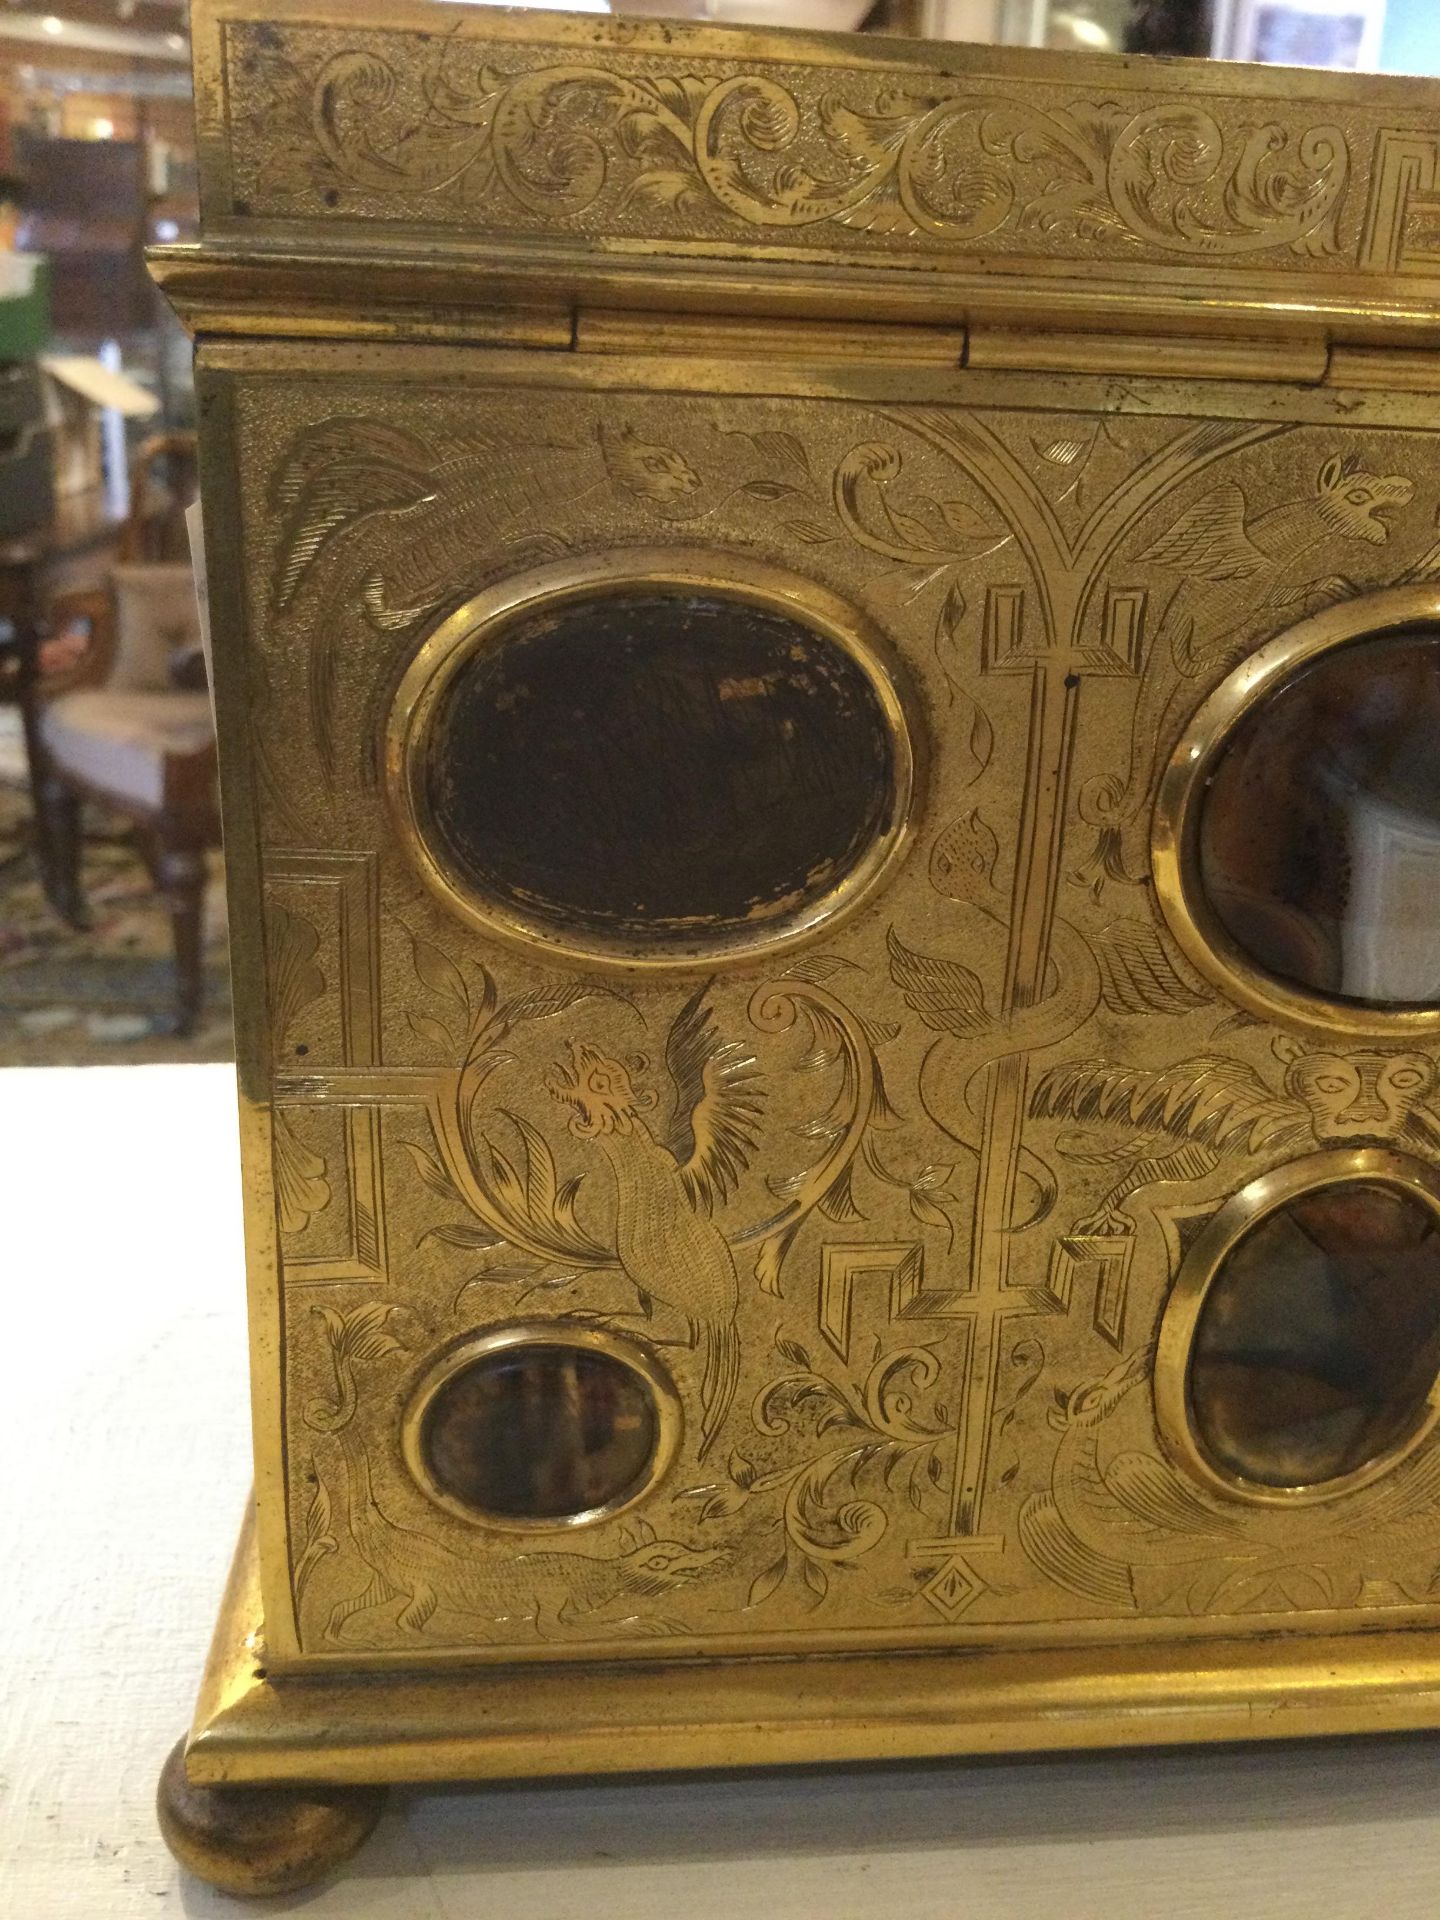 A 19th century correspondence gilt box with engraved decoration and inset cabochon stones hardstones - Bild 25 aus 25